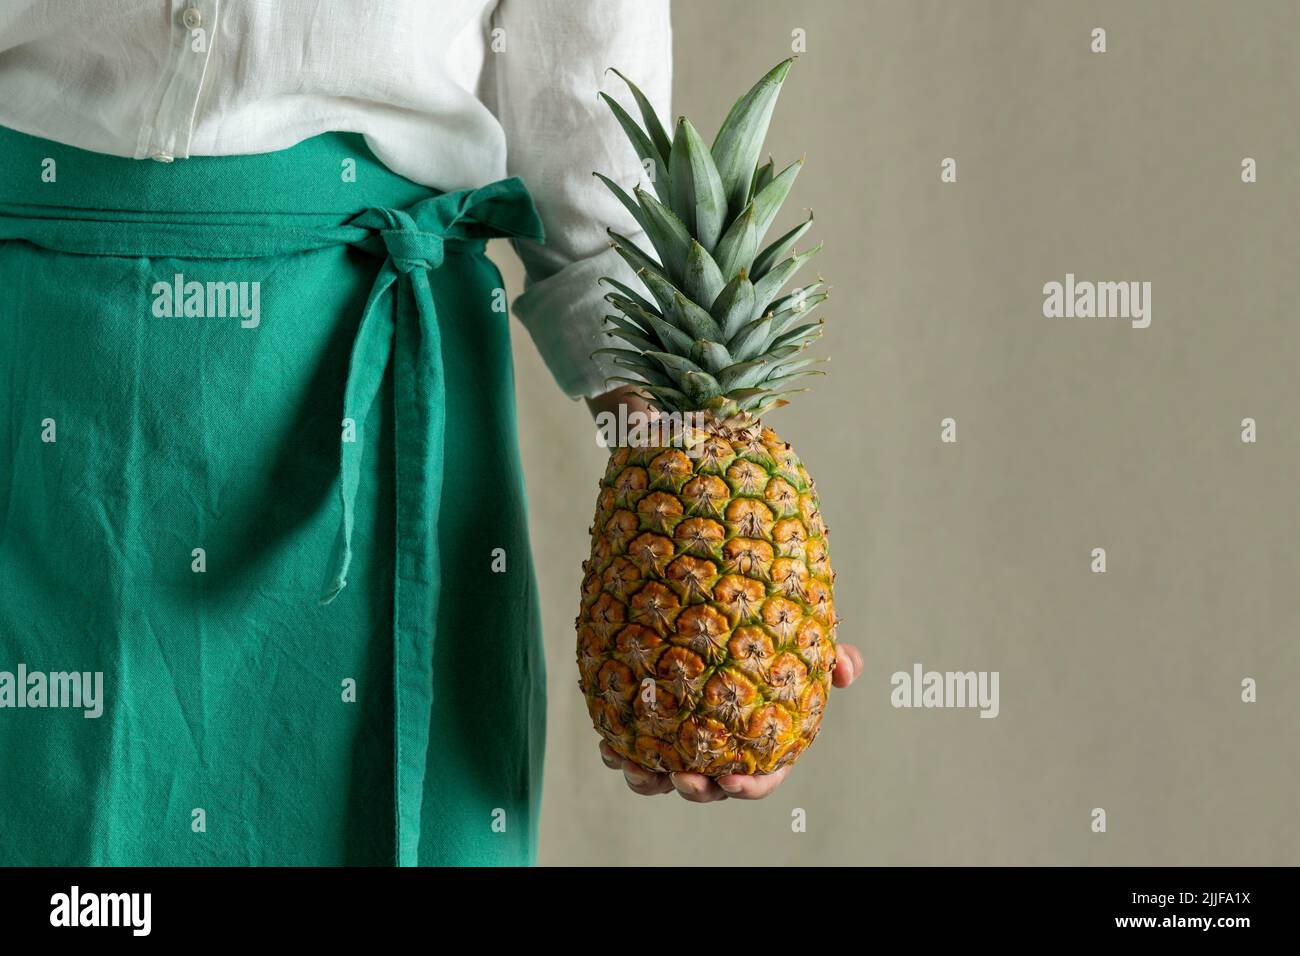 Woman holding pineapple, close up of fruit - stock photo Stock Photo